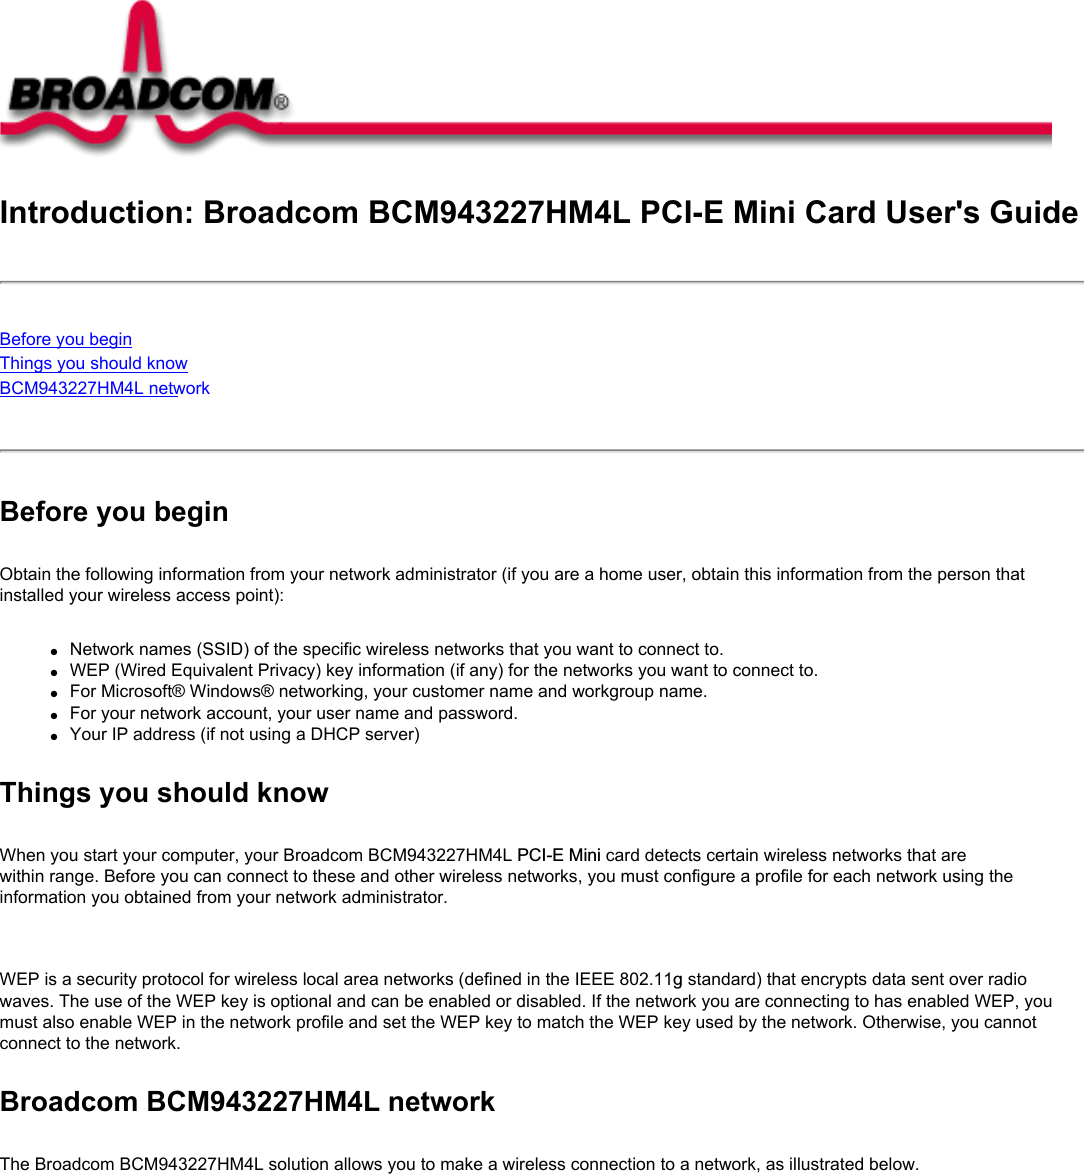 Introduction: Broadcom BCM943227HM4L PCI-E Mini Card User&apos;s GuideBefore you beginThings you should knowBCM943227HM4L network Before you beginObtain the following information from your network administrator (if you are a home user, obtain this information from the person that installed your wireless access point):●     Network names (SSID) of the specific wireless networks that you want to connect to.●     WEP (Wired Equivalent Privacy) key information (if any) for the networks you want to connect to.●     For Microsoft® Windows® networking, your customer name and workgroup name.●     For your network account, your user name and password.●     Your IP address (if not using a DHCP server)Things you should knowWhen you start your computer, your Broadcom BCM943227HM4L PCI-E Mini card detects certain wireless networks that are within range. Before you can connect to these and other wireless networks, you must configure a profile for each network using the information you obtained from your network administrator.   WEP is a security protocol for wireless local area networks (defined in the IEEE 802.11g standard) that encrypts data sent over radio waves. The use of the WEP key is optional and can be enabled or disabled. If the network you are connecting to has enabled WEP, you must also enable WEP in the network profile and set the WEP key to match the WEP key used by the network. Otherwise, you cannot connect to the network.Broadcom BCM943227HM4L networkThe Broadcom BCM943227HM4L solution allows you to make a wireless connection to a network, as illustrated below.